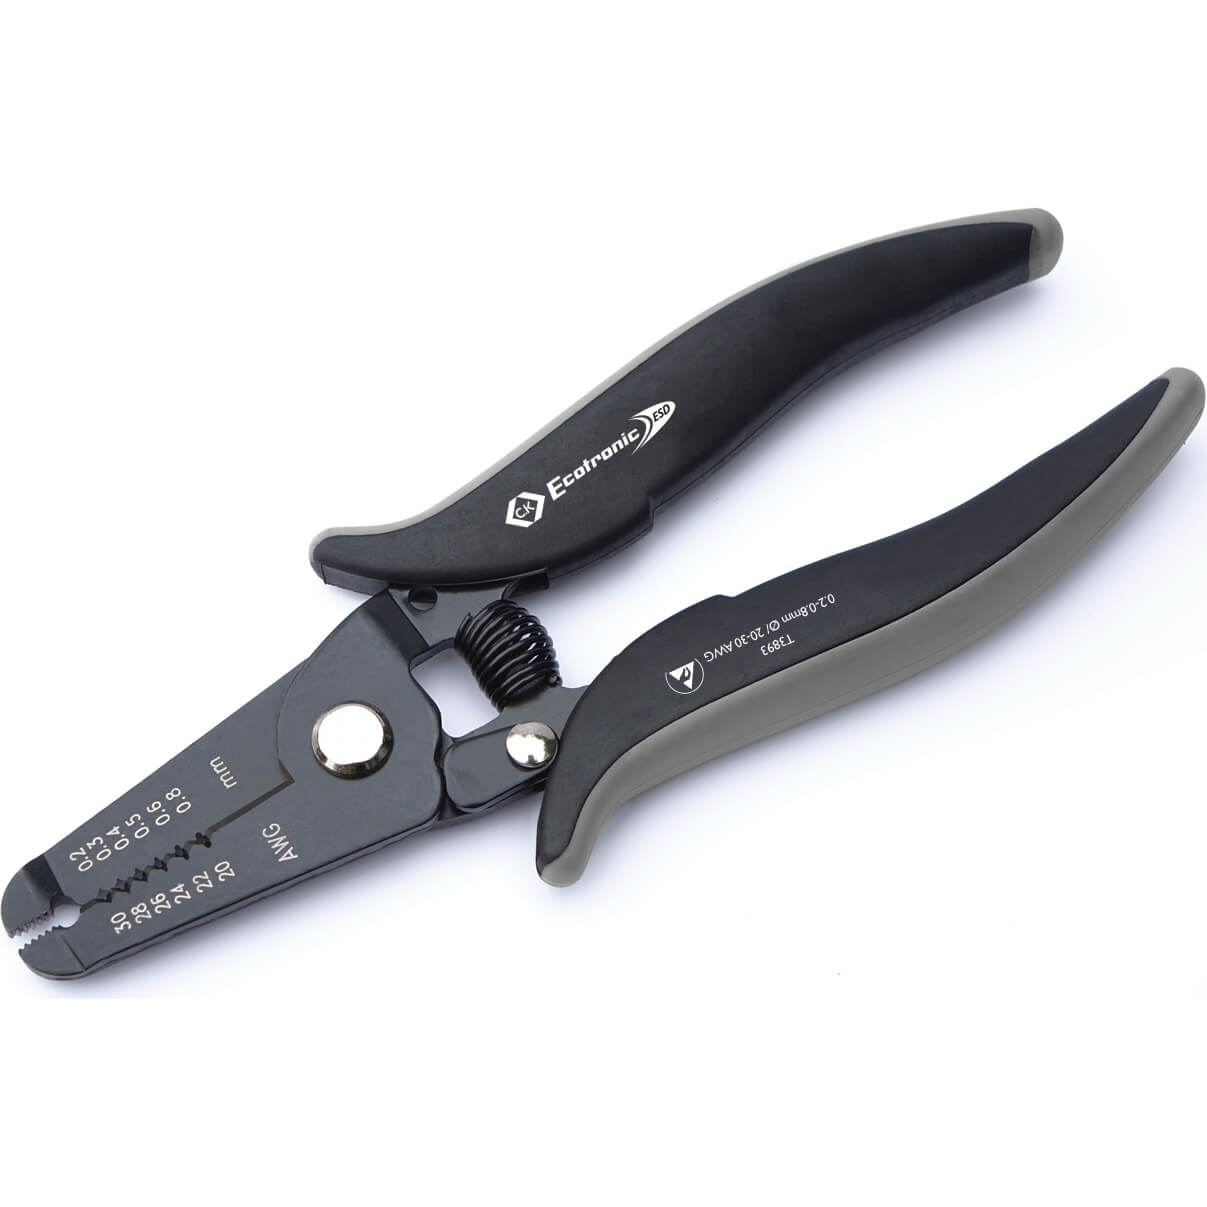 Image of CK Ecotronic ESD Wire Stripping Pliers 0.2mm - 0.8mm